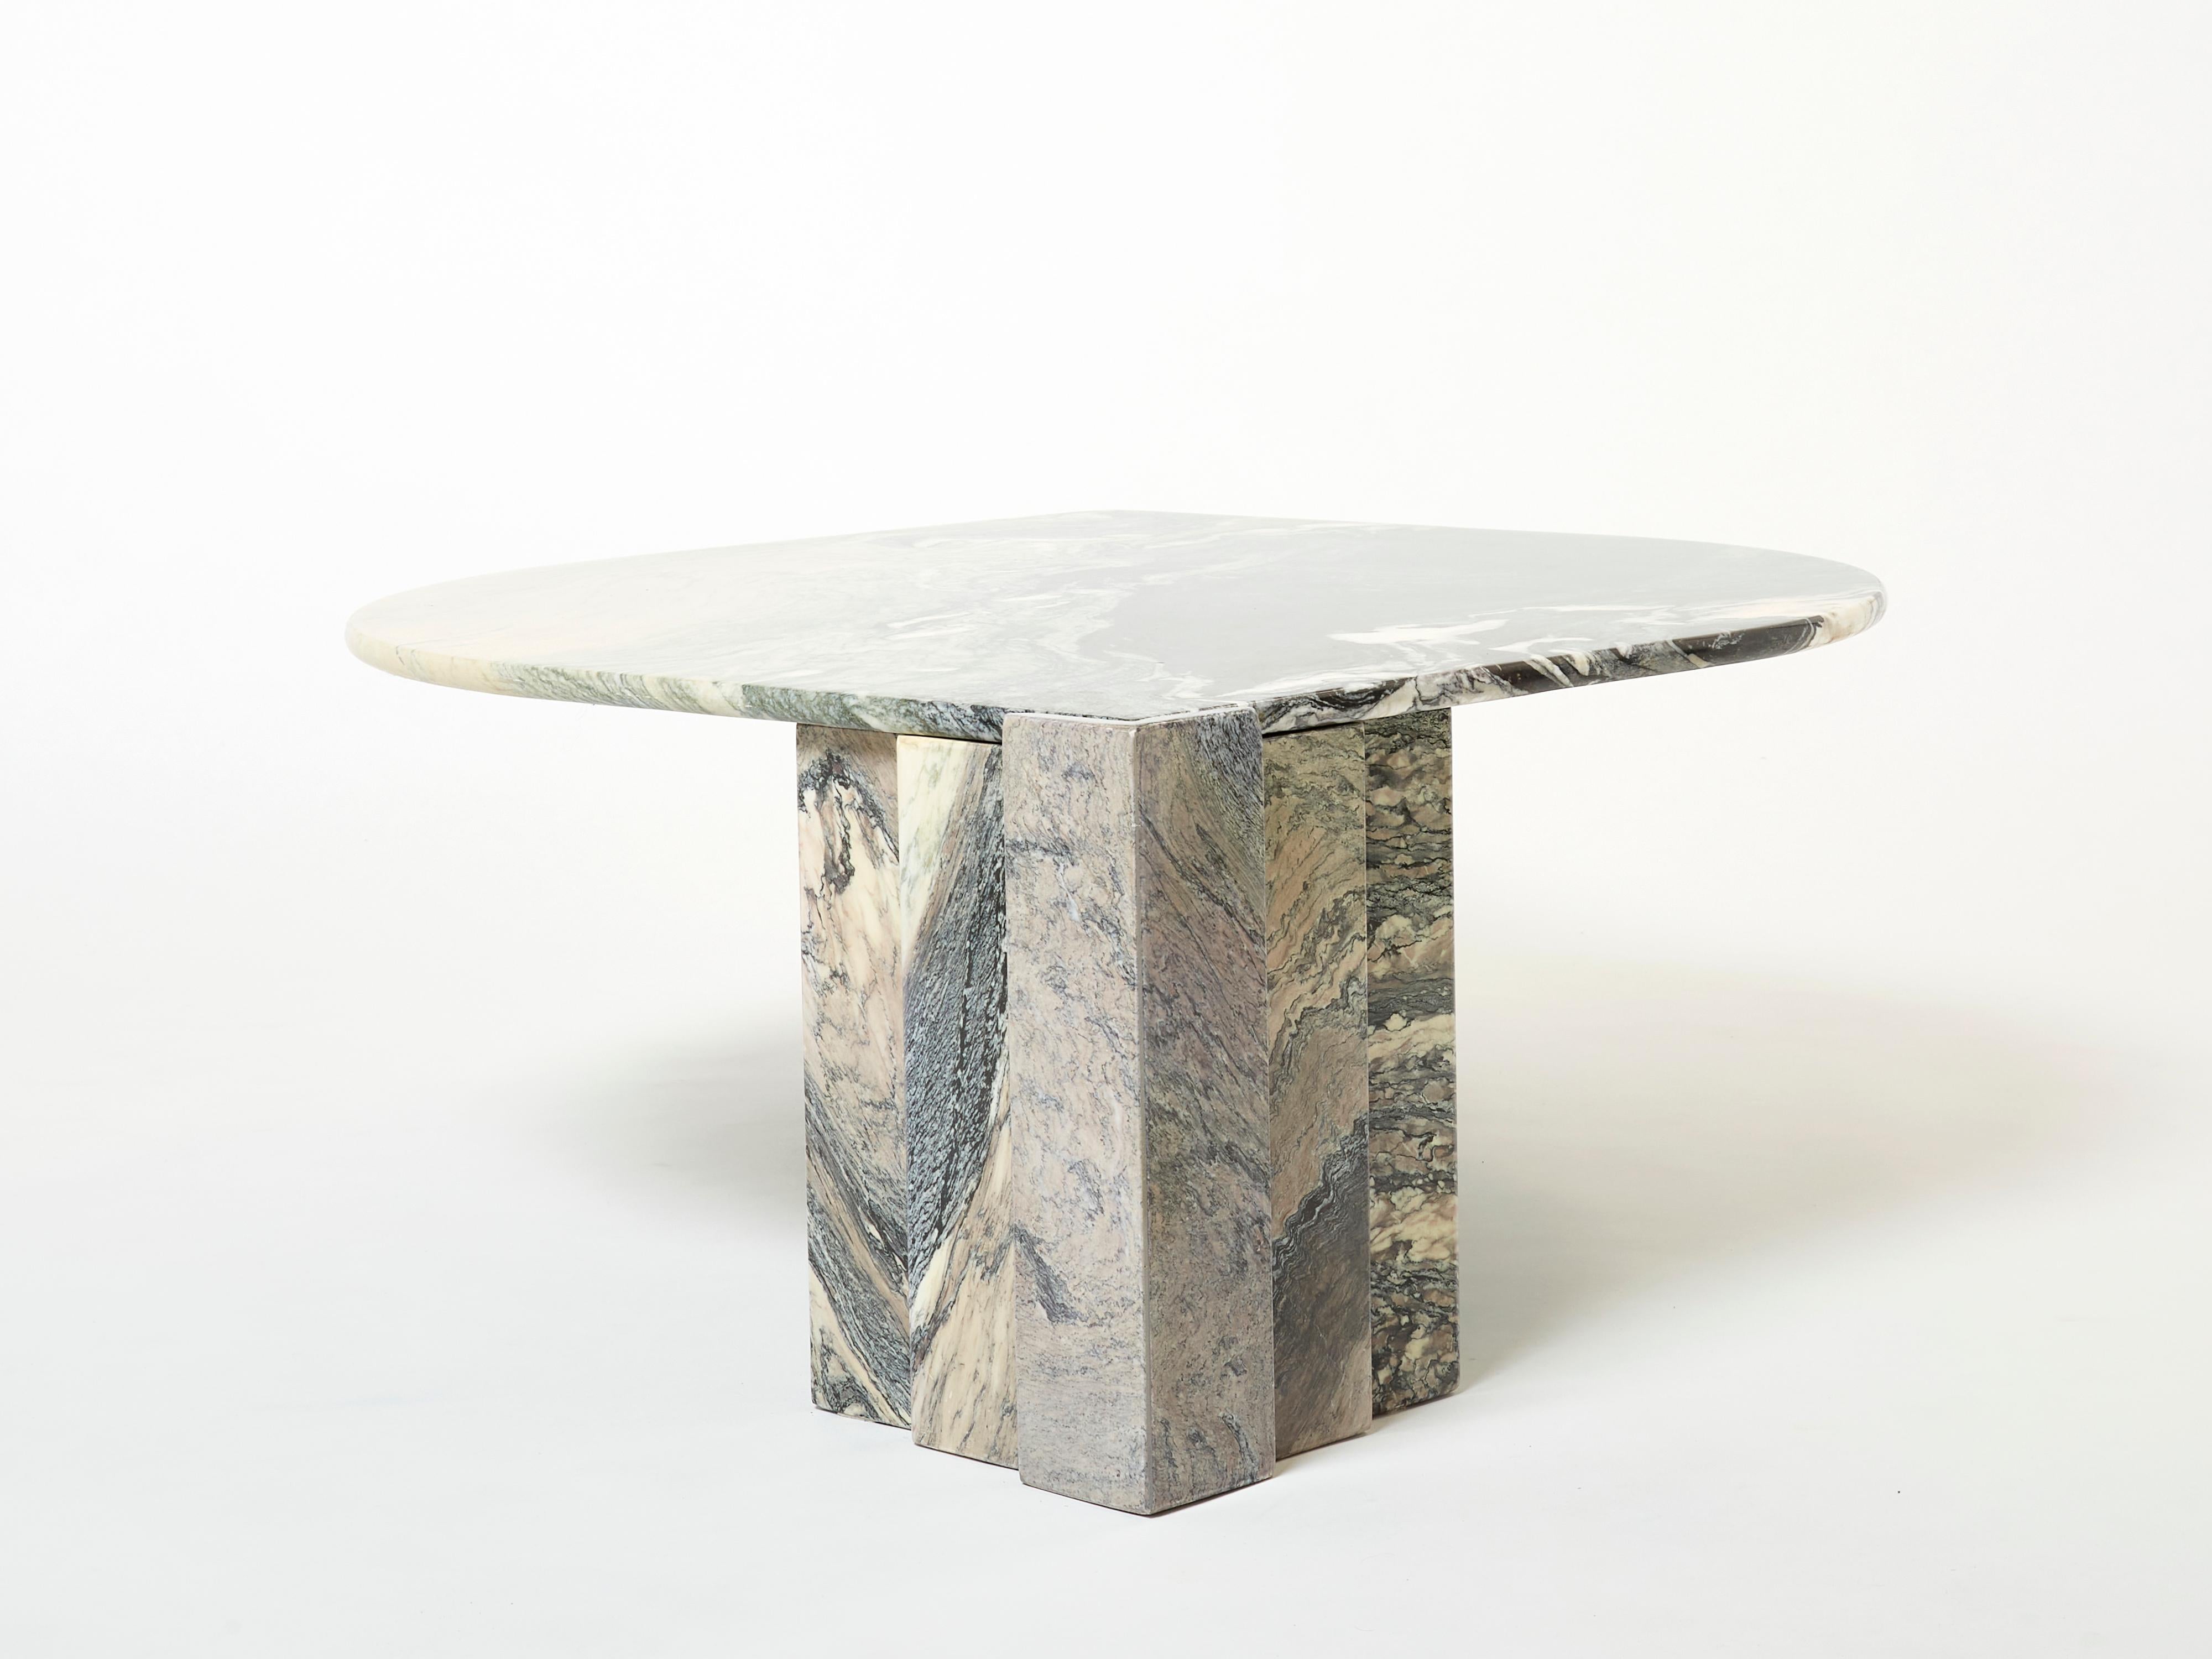 Large Eye Shaped Sicilian Marble Coffee Table, 1970s For Sale 5